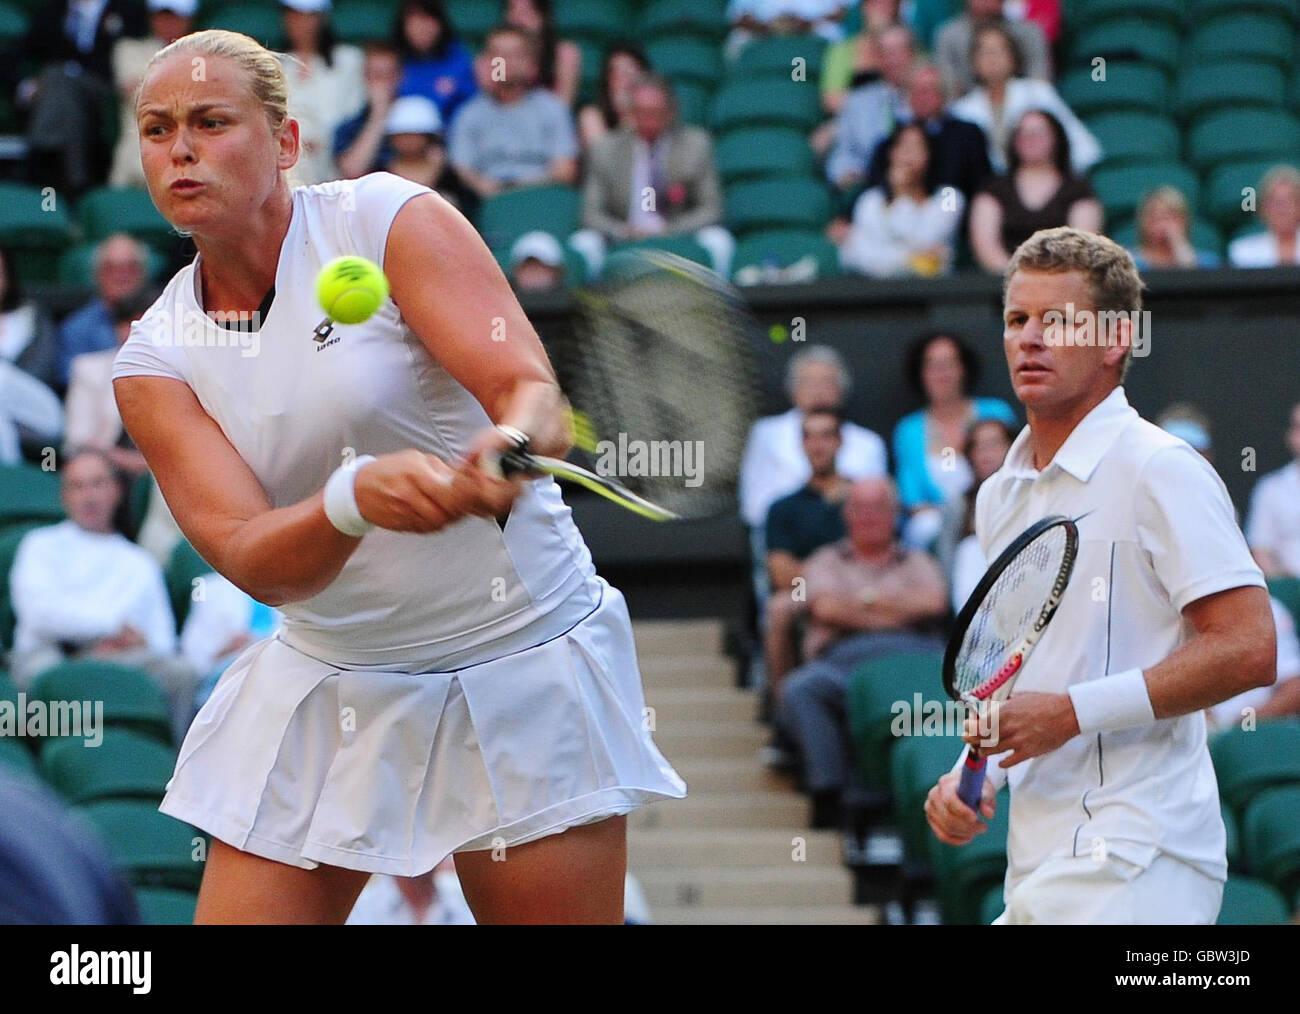 Bahamas Mark Knowles and Germany's Anna-Lena Groenefeld in their Mixed Doubles Final during the Wimbledon Championships at the All England Lawn Tennis and Croquet Club, Wimbledon, London. Stock Photo